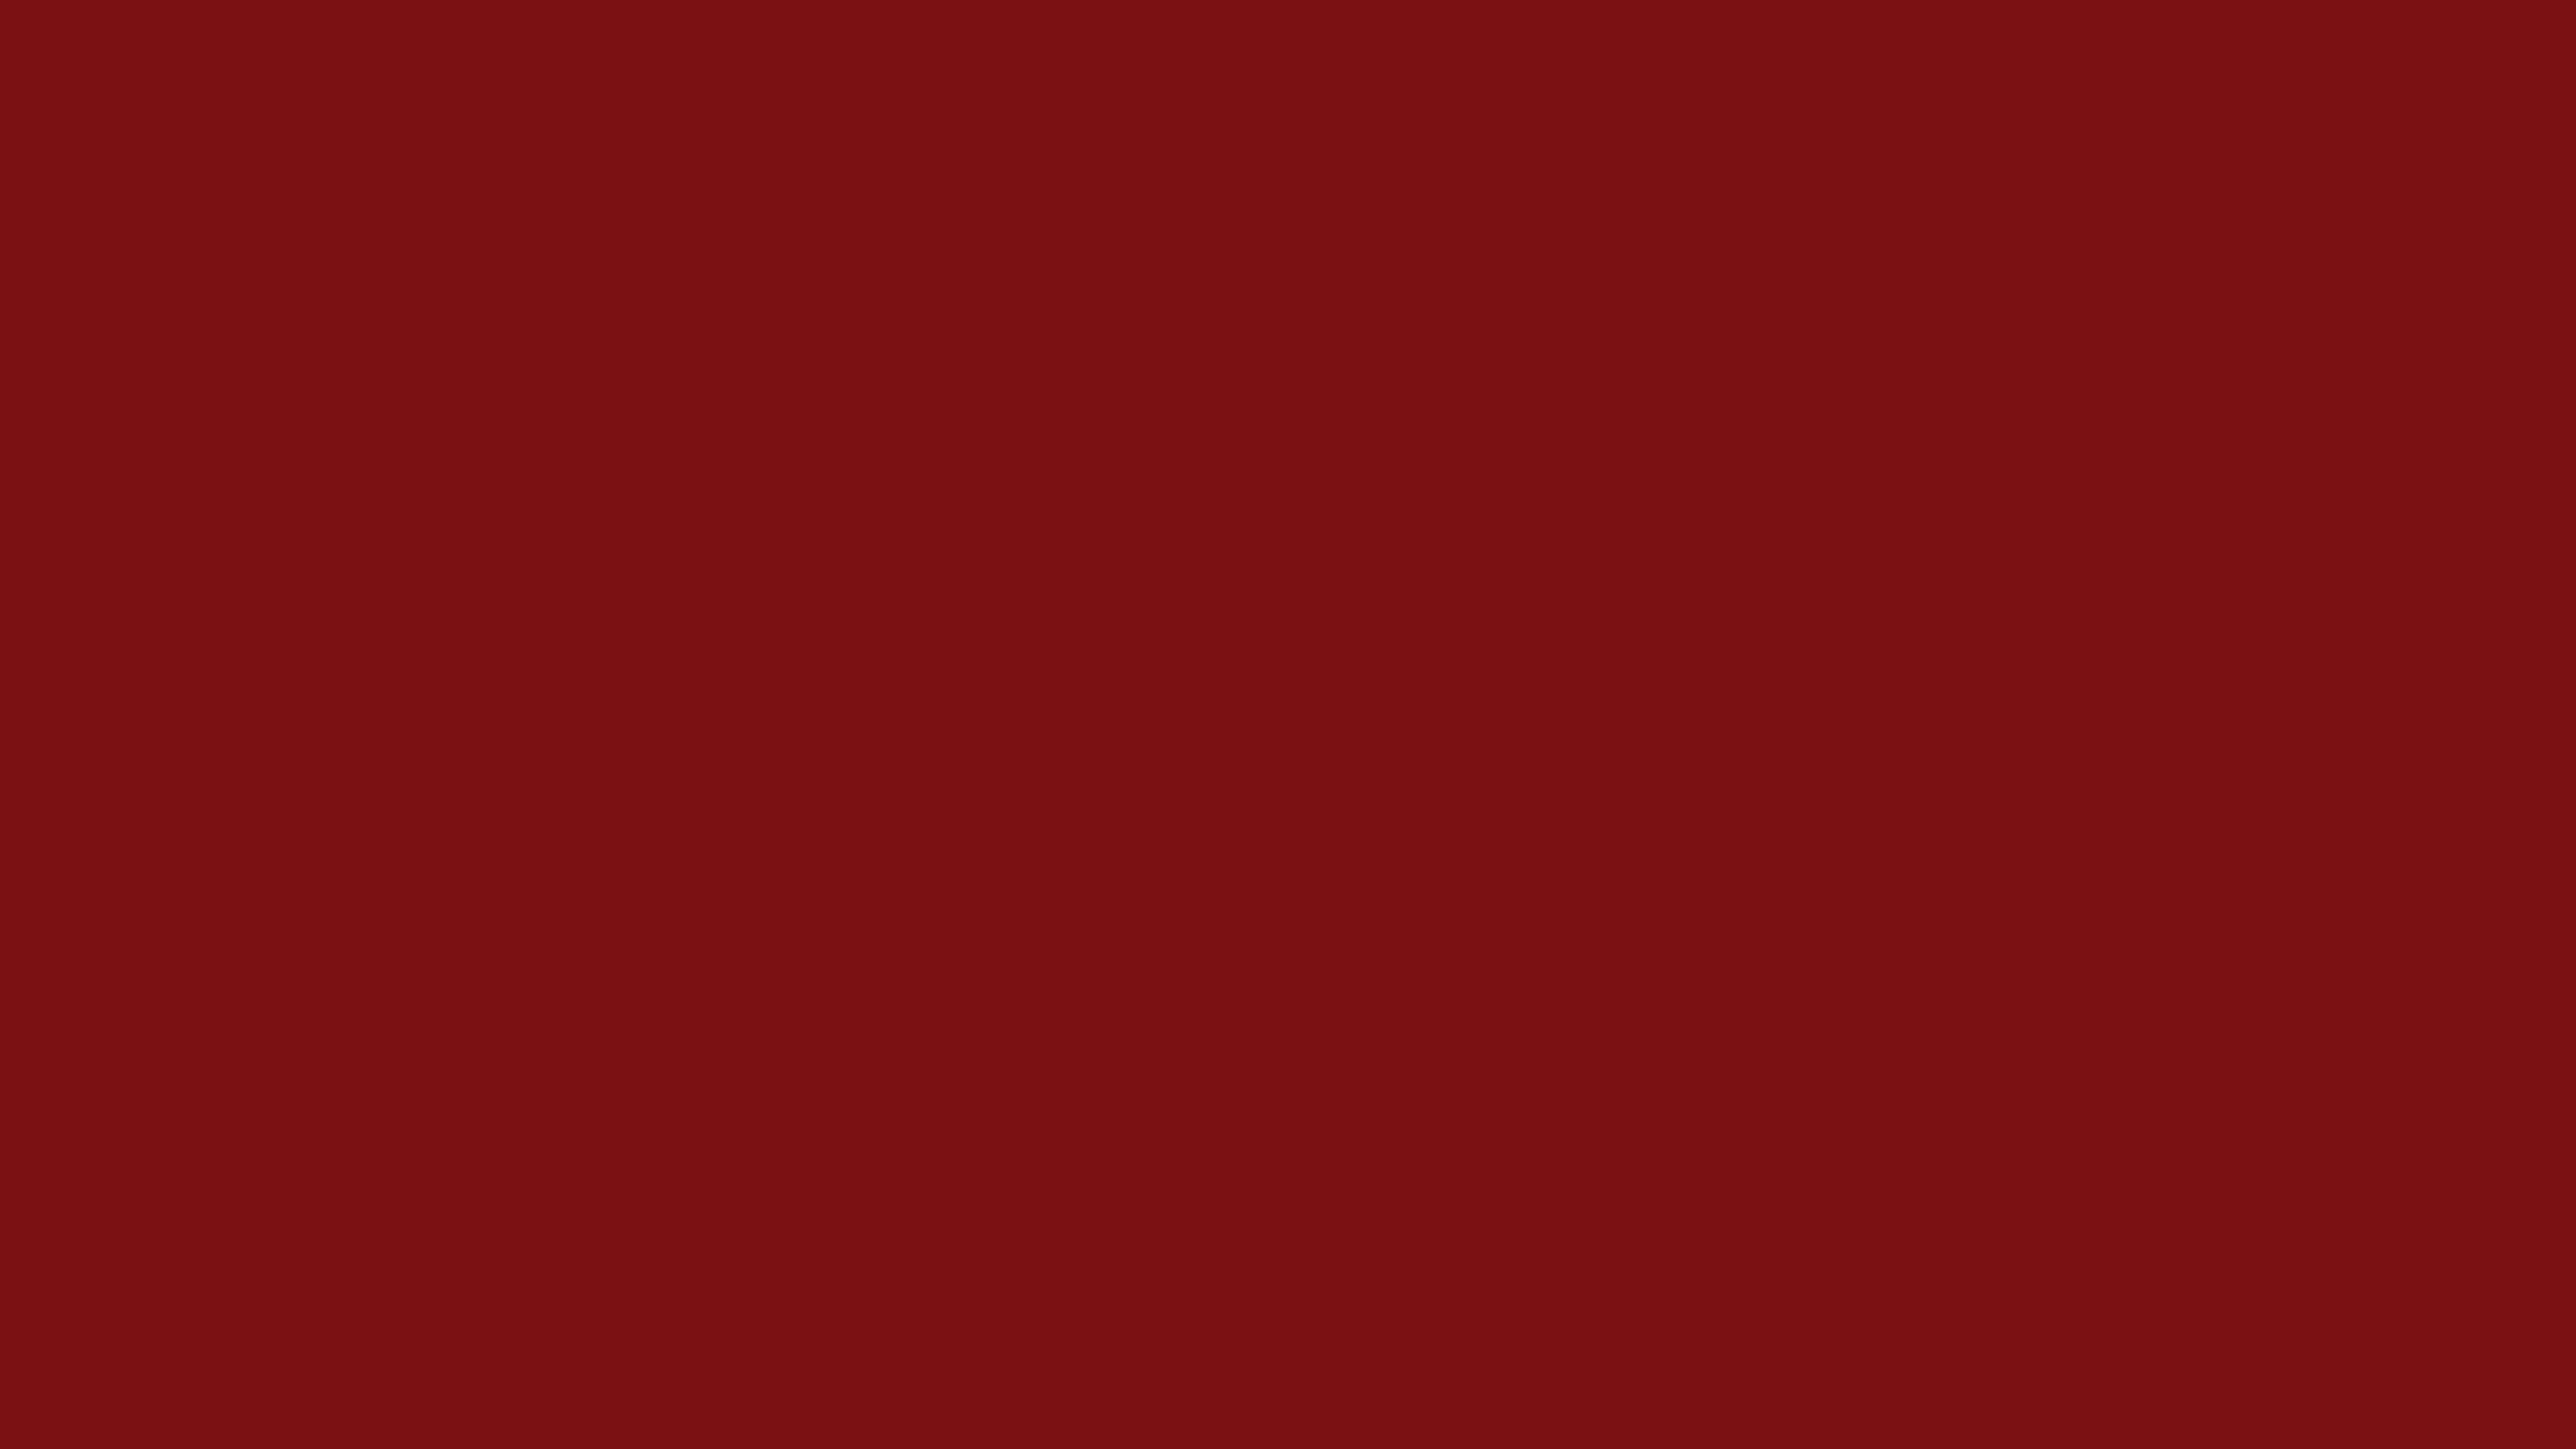 7680x4320 UP Maroon Solid Color Background